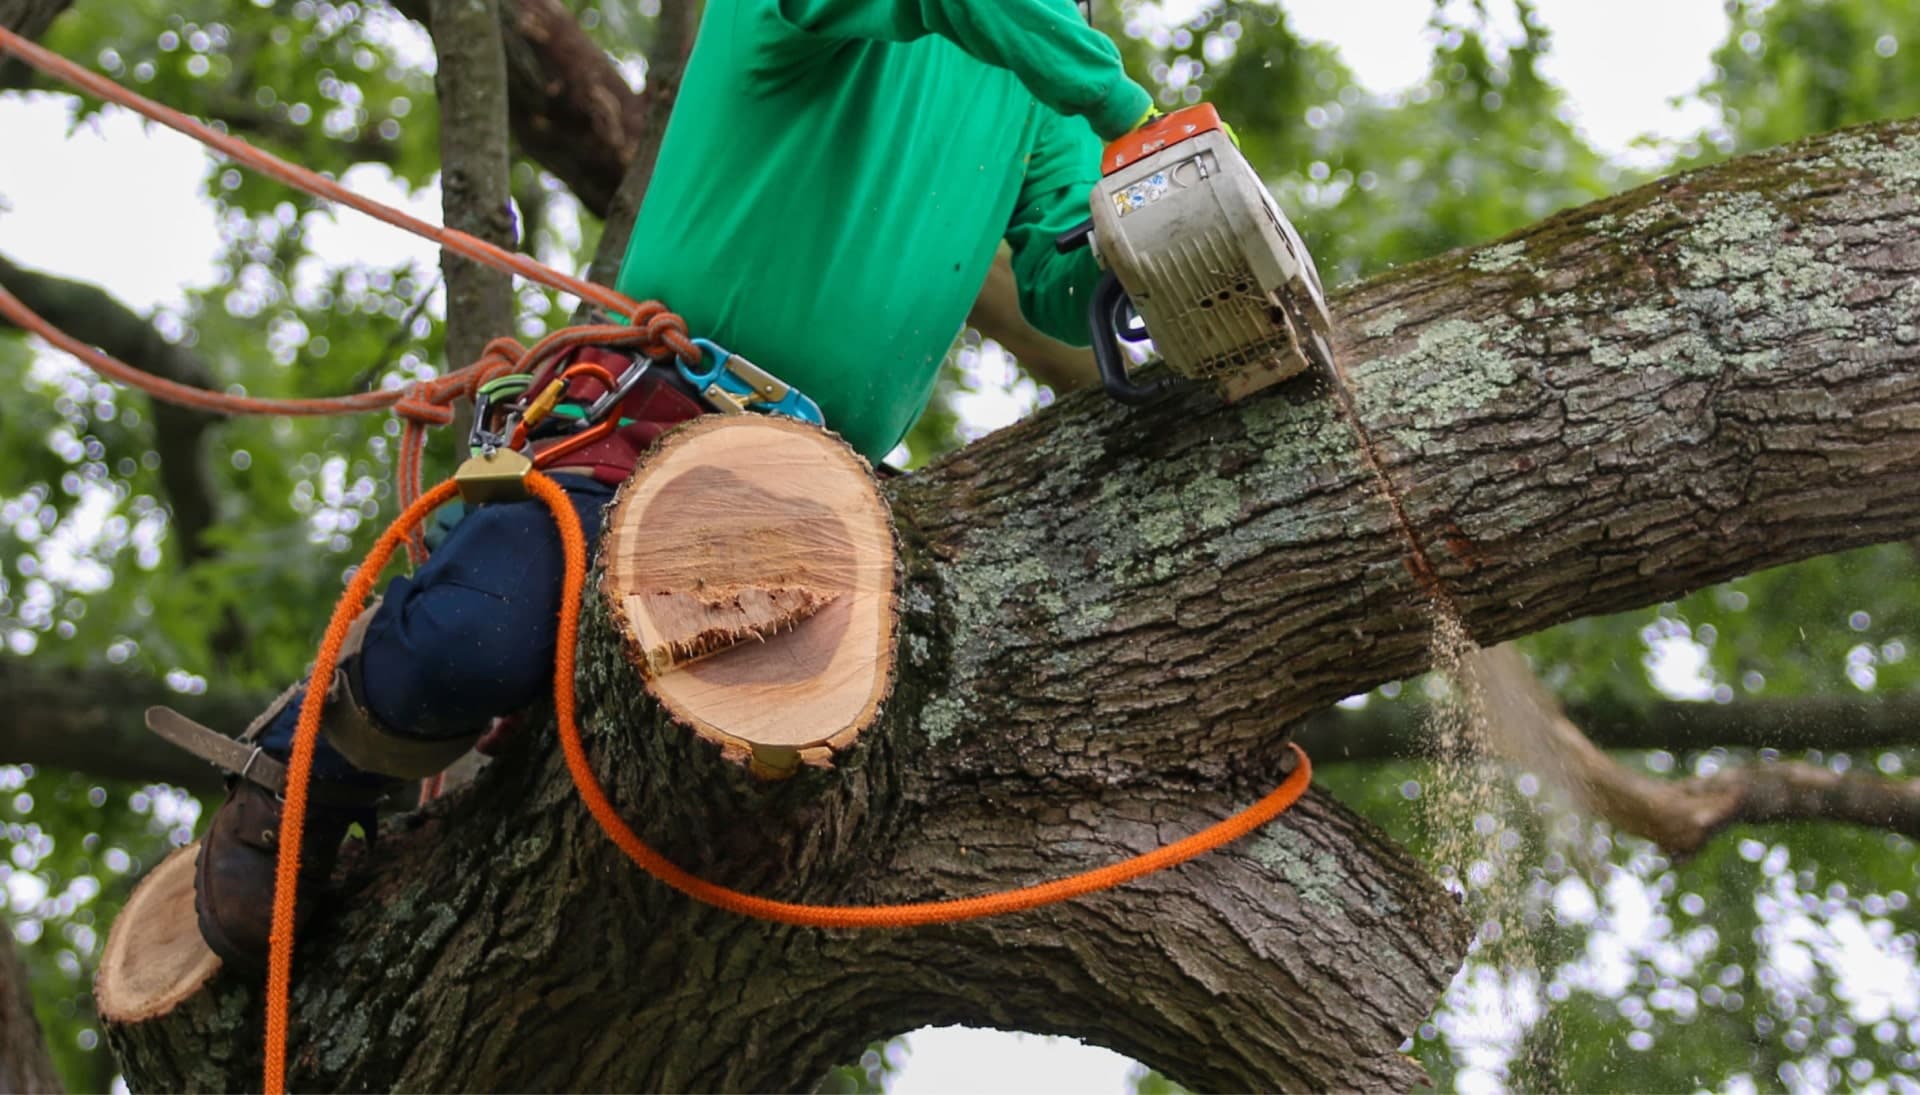 Shed your worries away with best tree removal in Newark